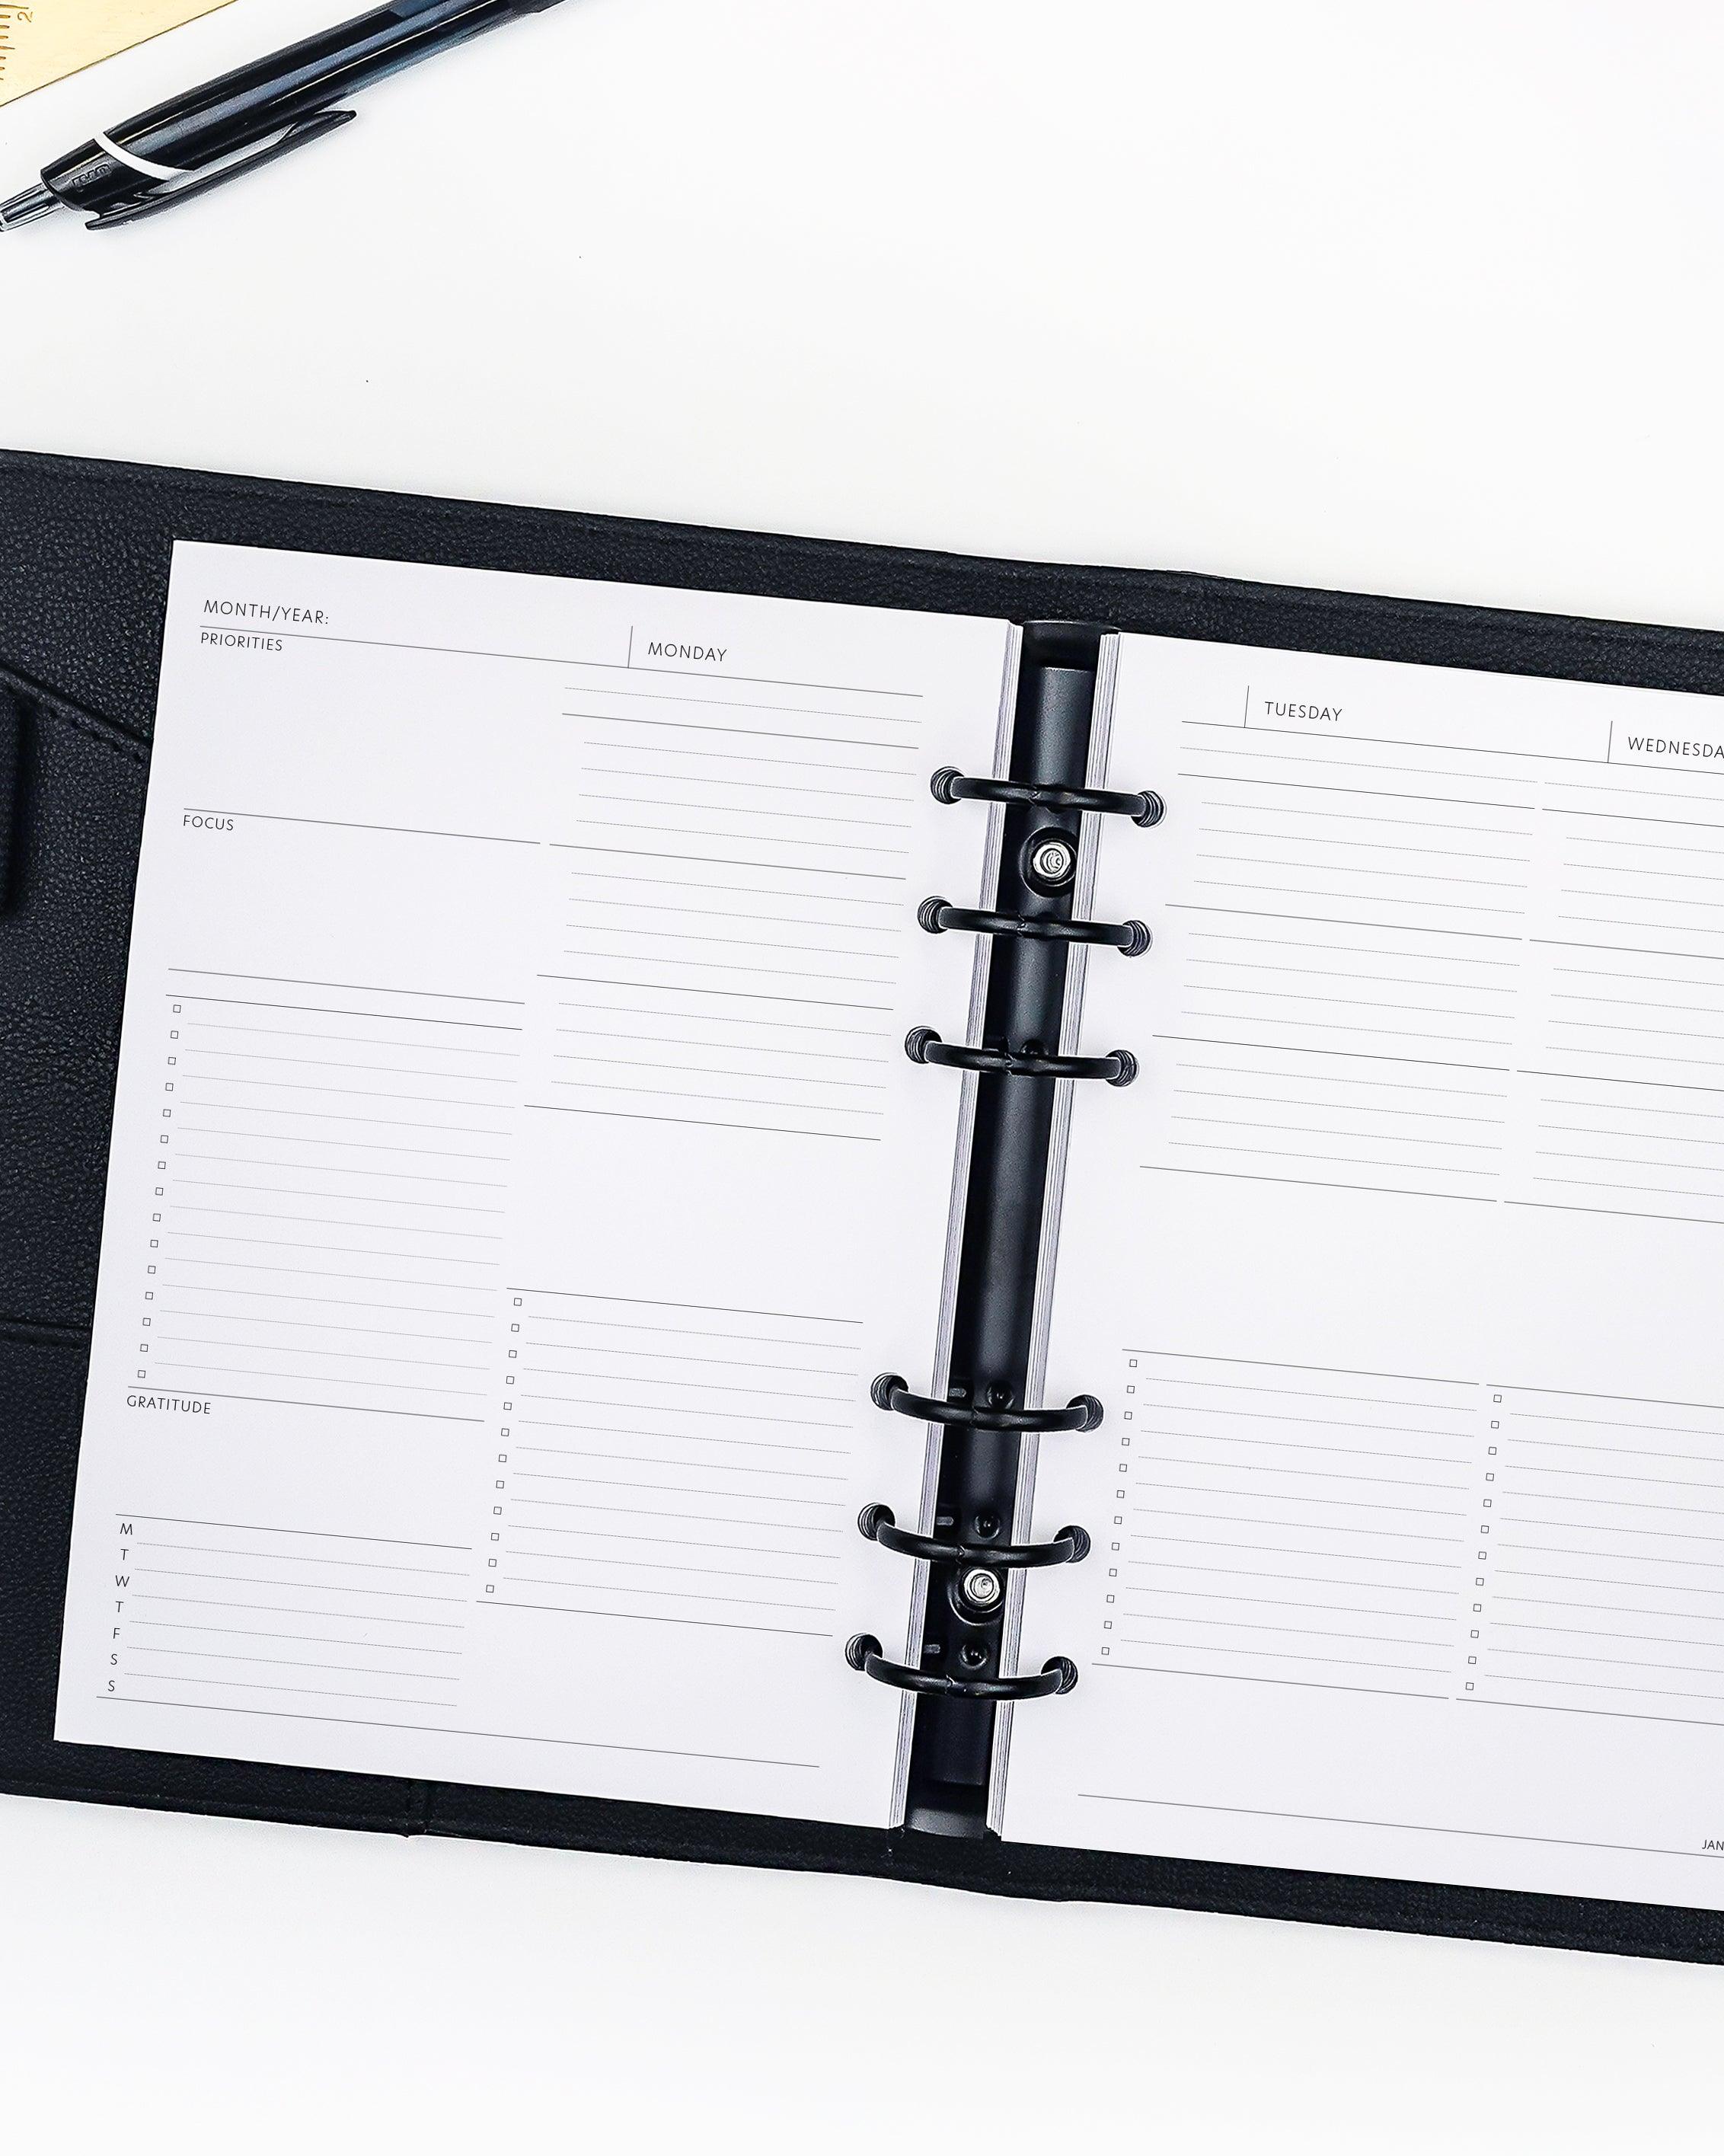 Daily planner inserts refill pages for discbound and six ring planners and planner binding systems by Janes Agenda.